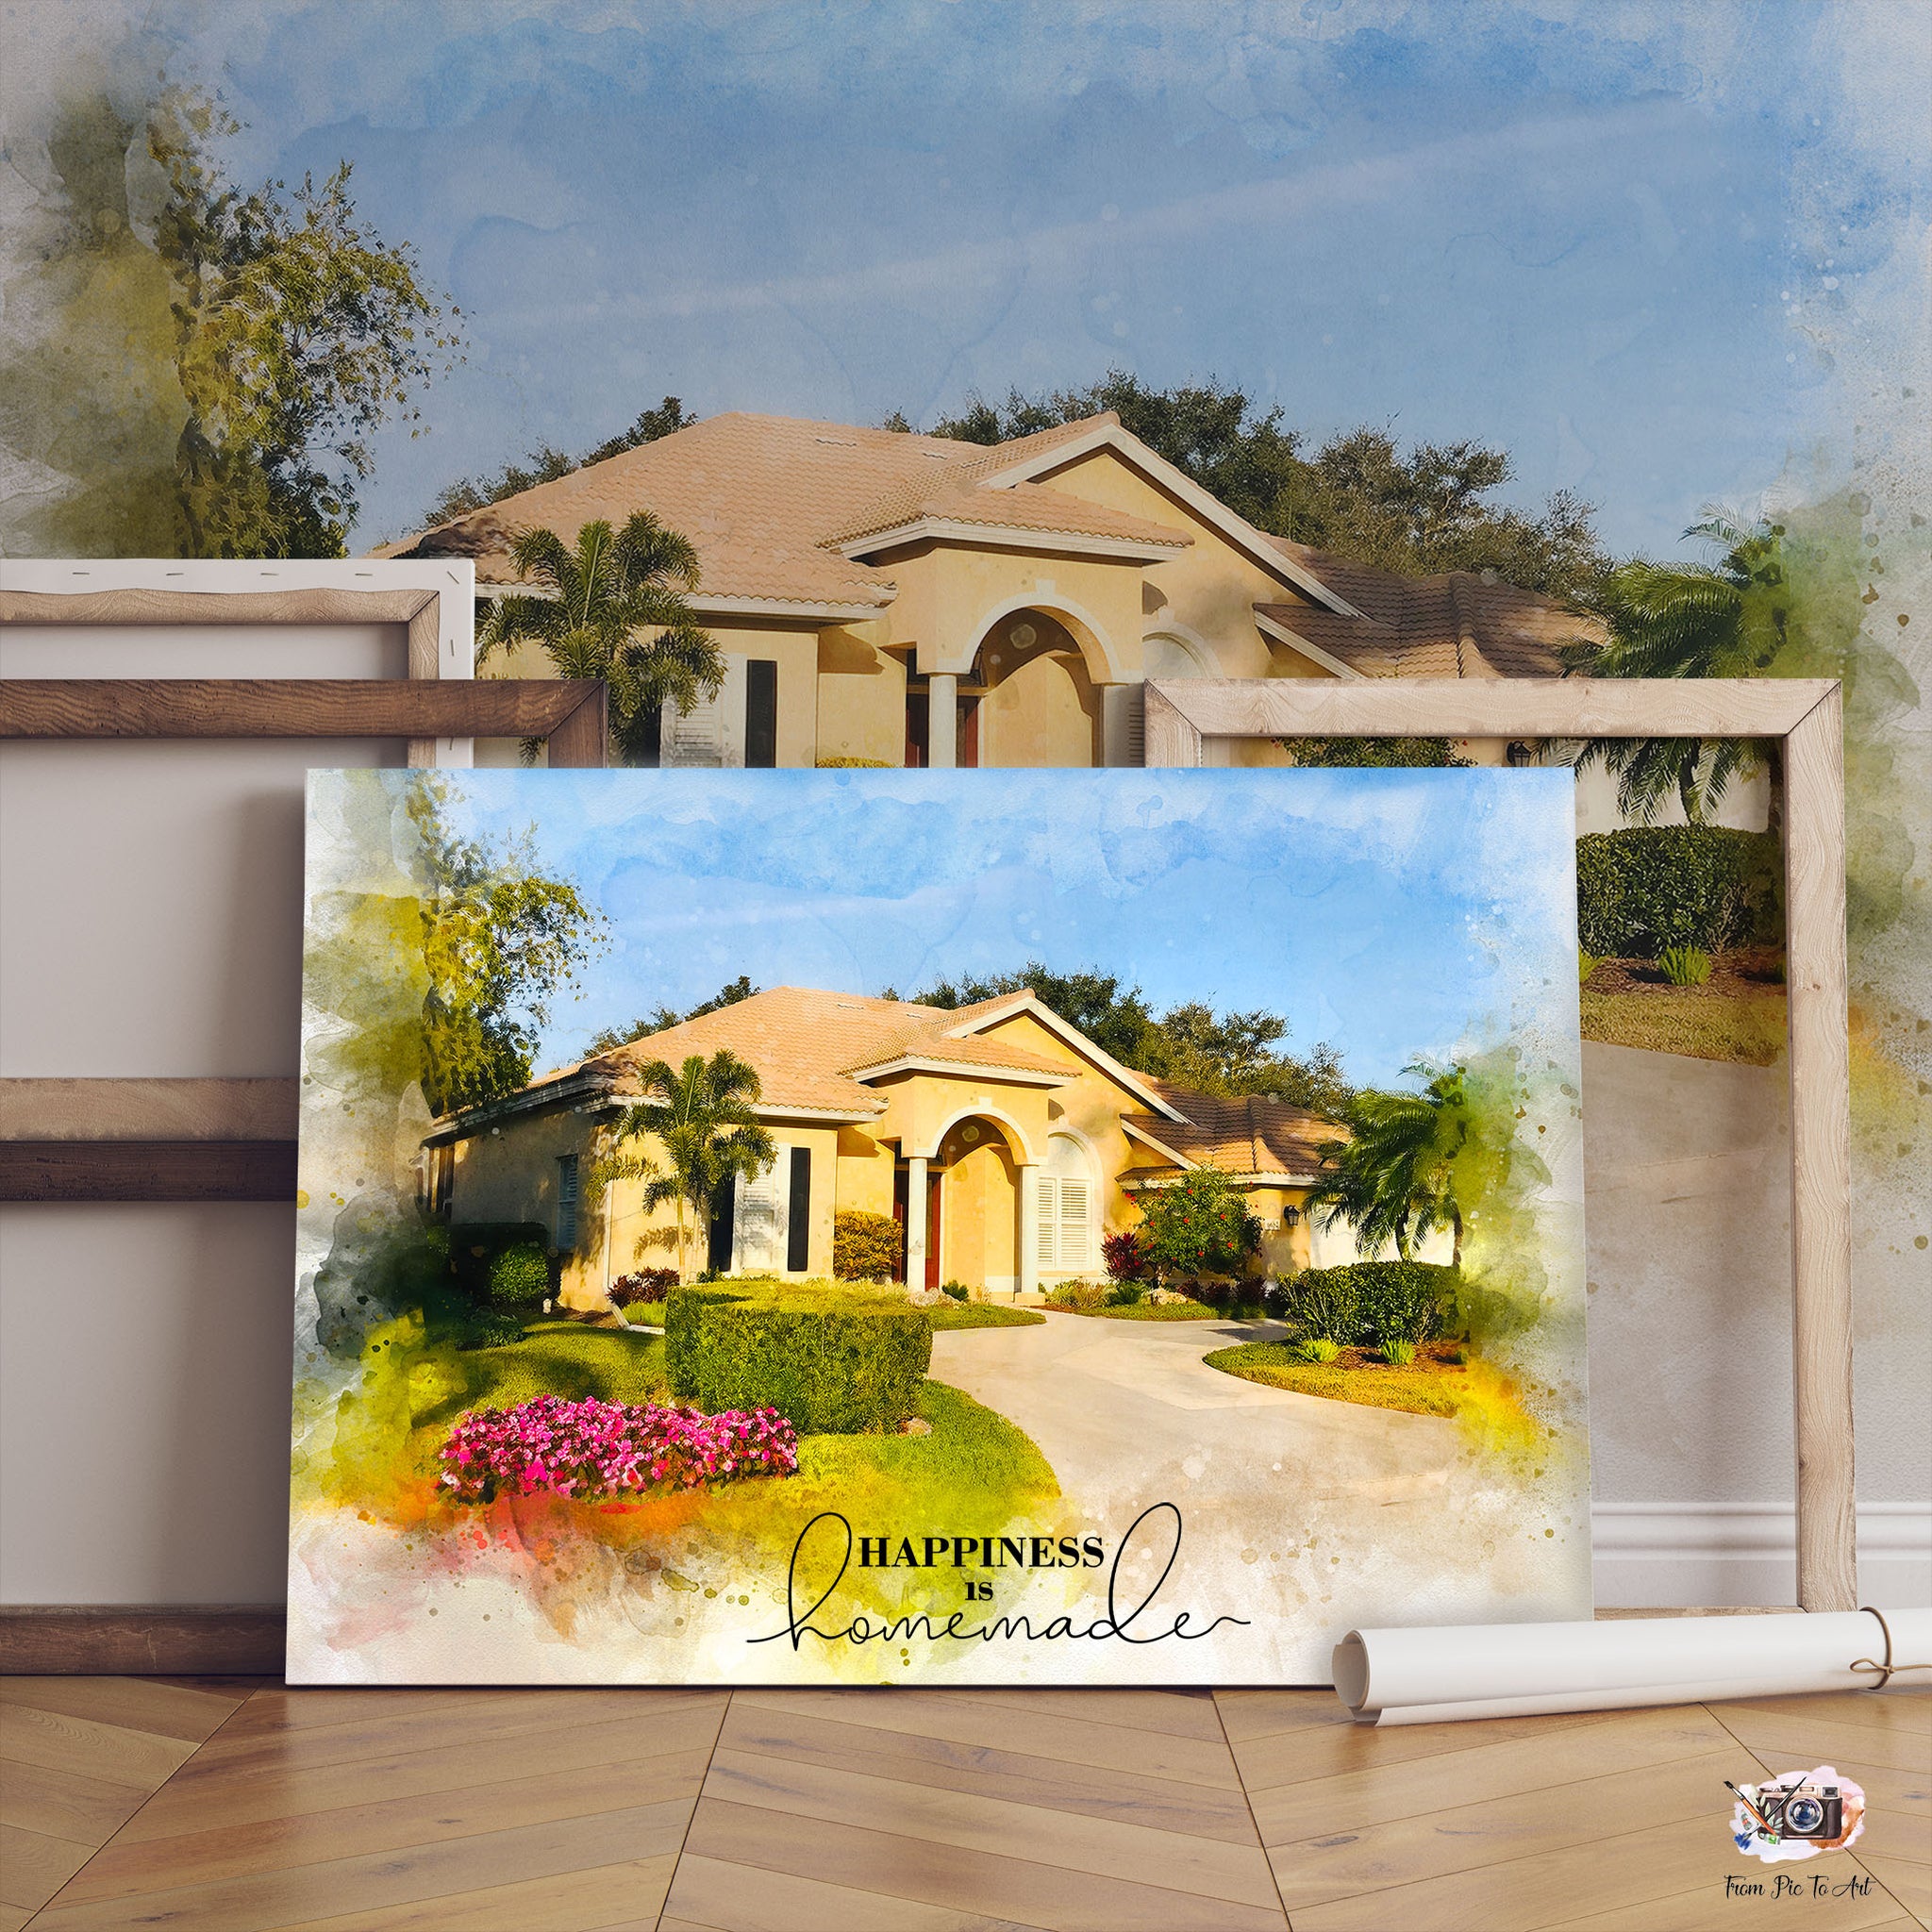 Gift from Real Estate Agent | Realtor Closing Gifts Idea | Custom House Portraits - FromPicToArt